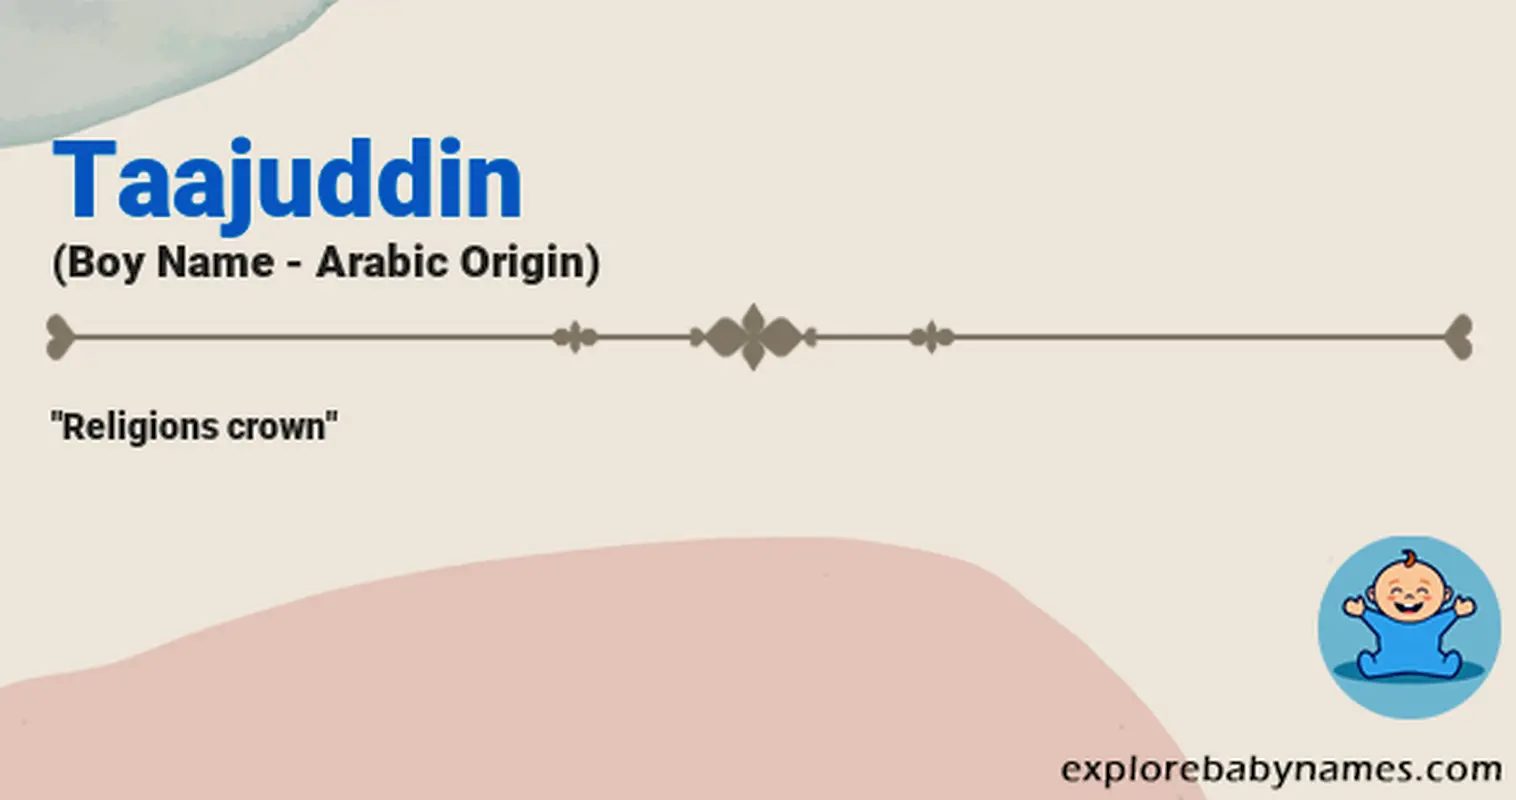 Meaning of Taajuddin